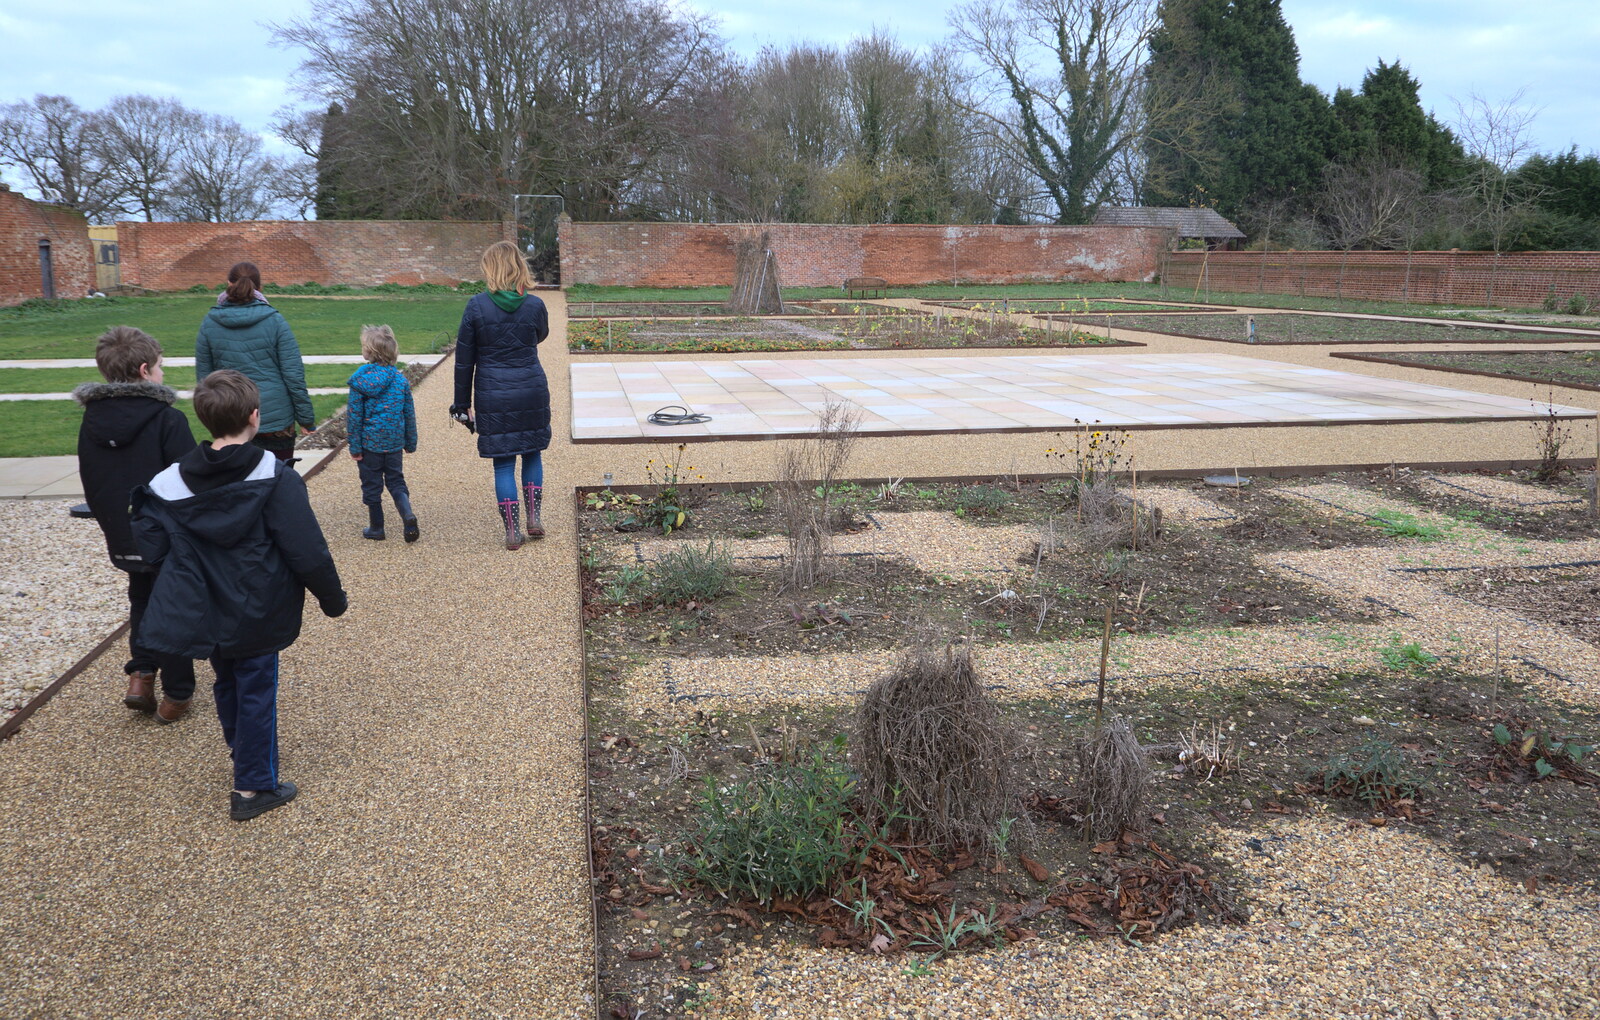 The new Victorian kitchen gardens at the Oaksmere from New Year's Eve and Day, Brome, Suffolk - 1st January 2019